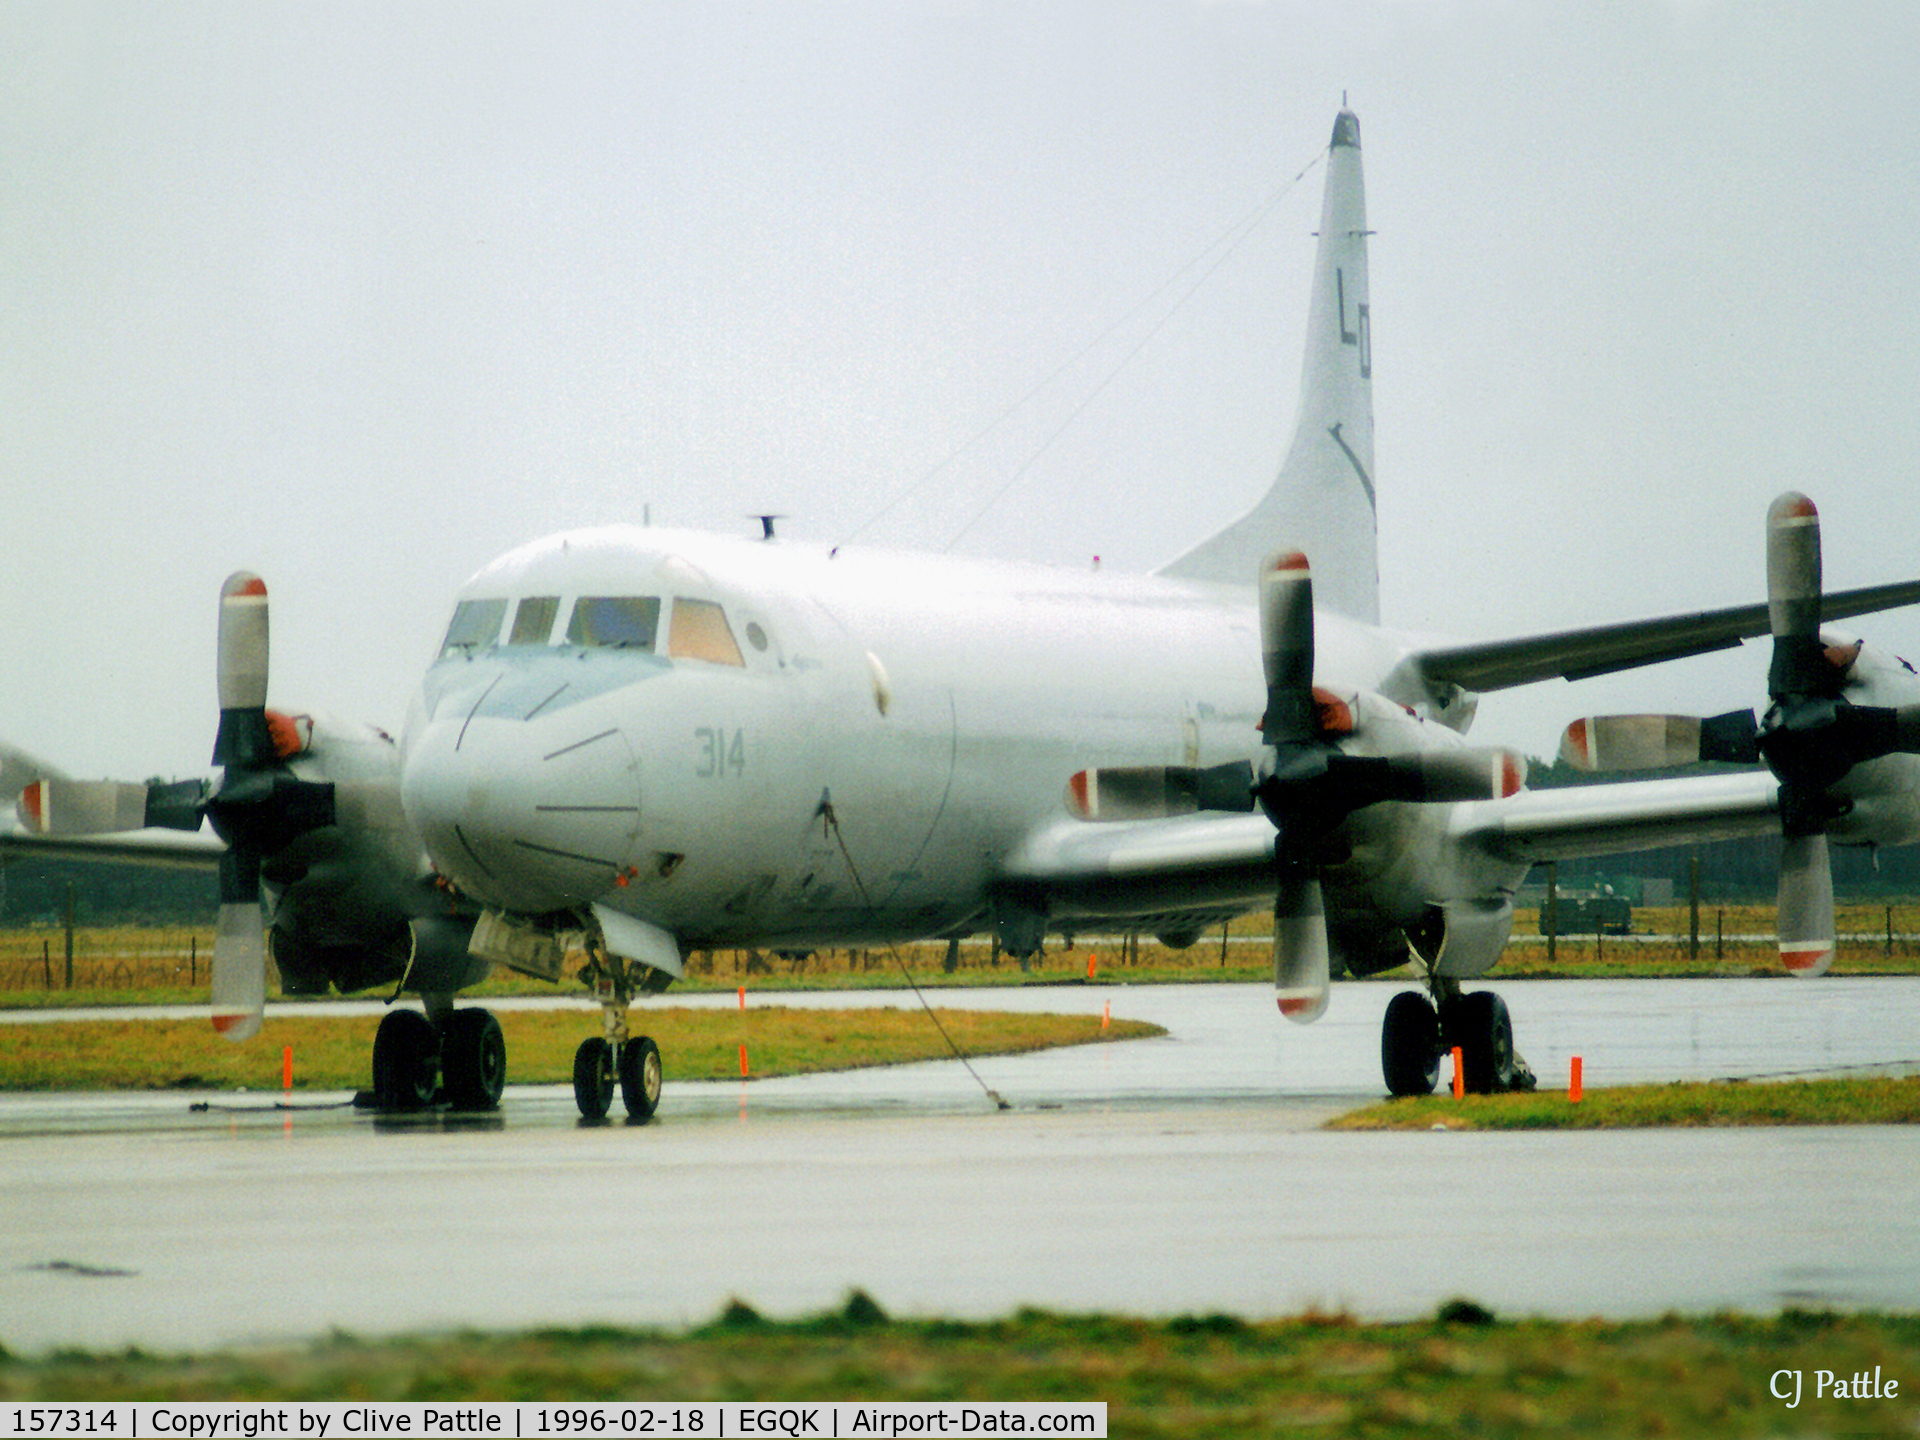 157314, Lockheed P-3C Orion C/N 285A-5529, Scanned from print.P3C Orion 157314 coded LD-314 of USN VP-10 pictured at RAF Kinloss EGQK in Feb '96 during a Joint Maritime Course (JMC).